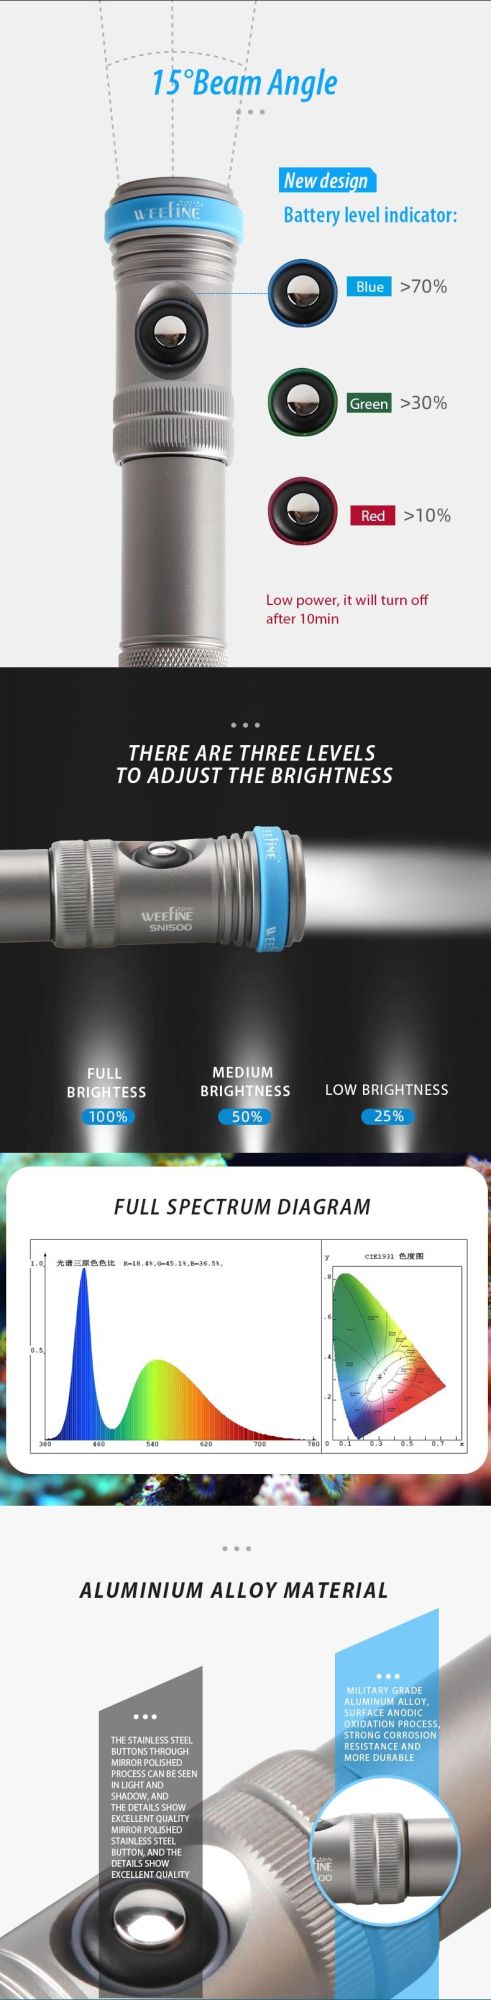 New Design Diving Flashlight with 3rd General Crea LED Xml Lasting Back-up Time